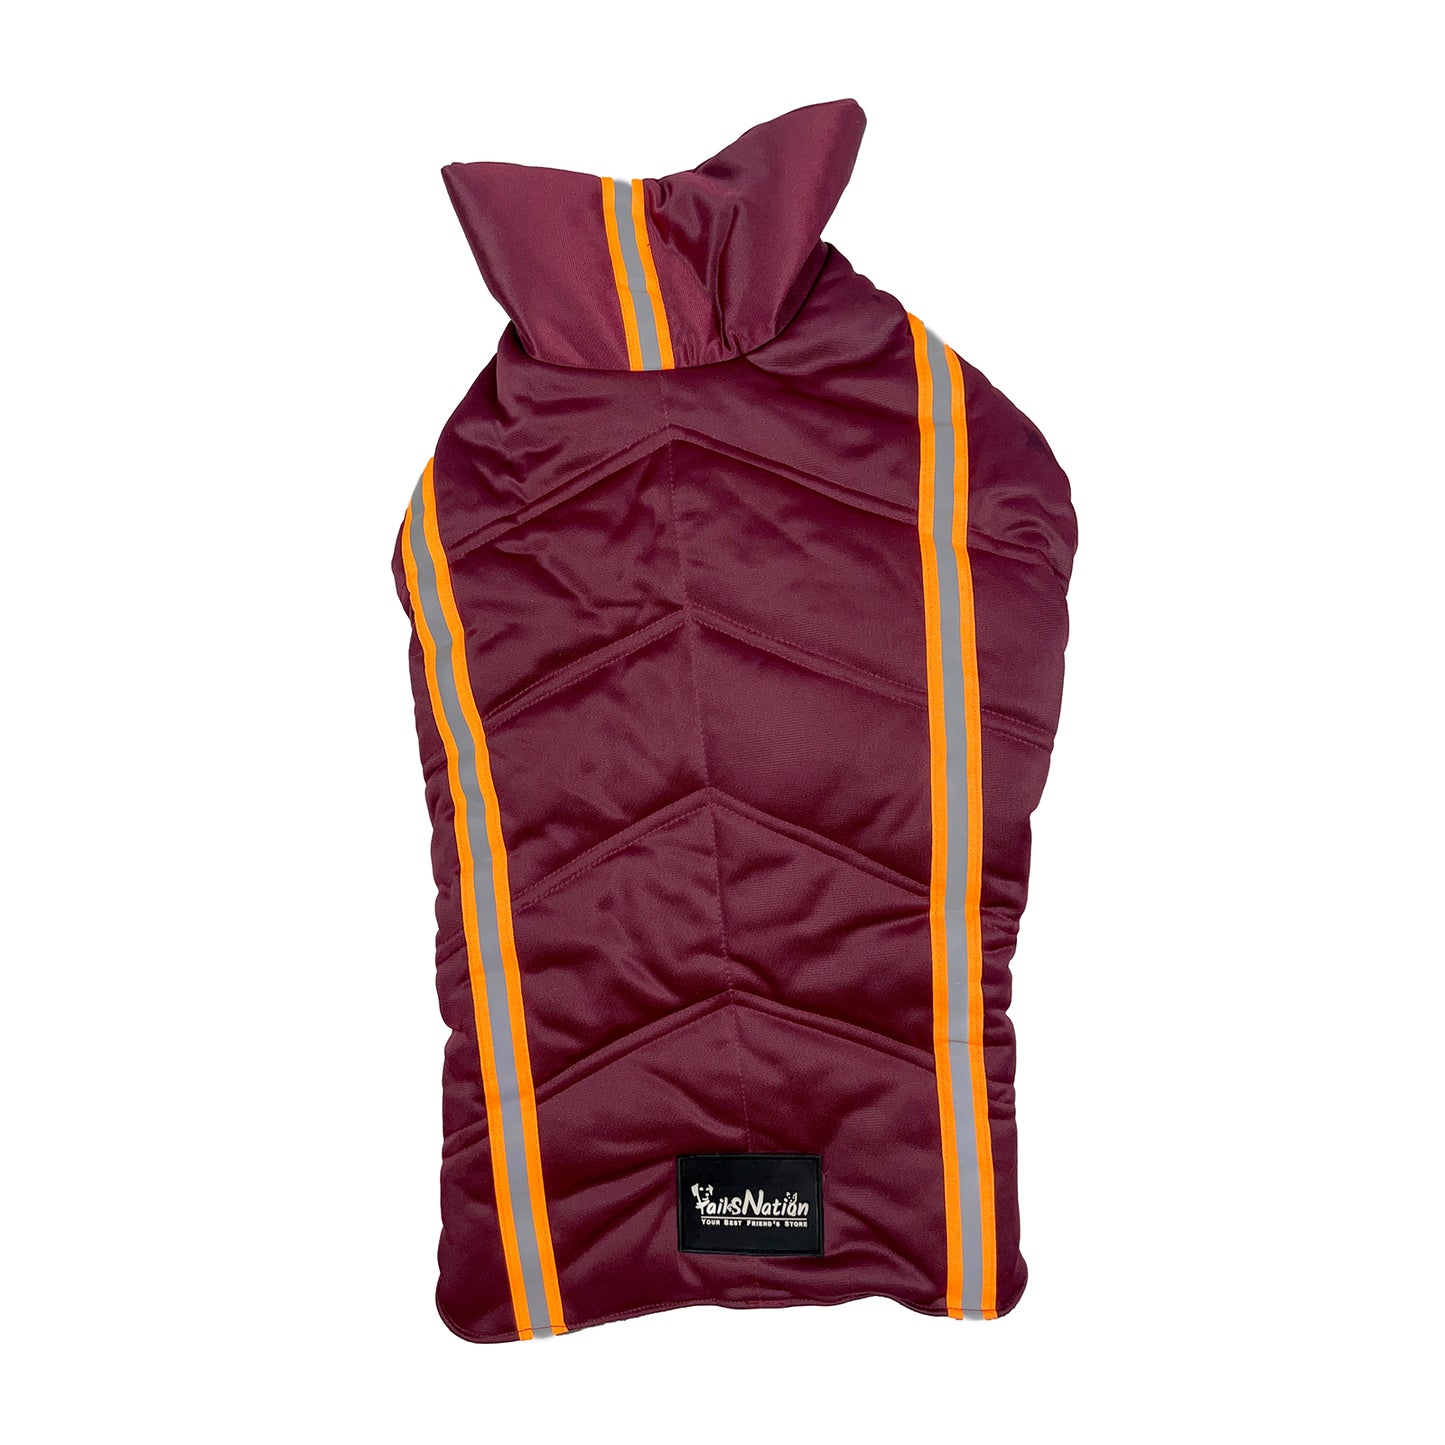 Tails Nation Reflector Jacket with Chain Wine Berry | Warm and Comfy | Best for Hiking and Travel